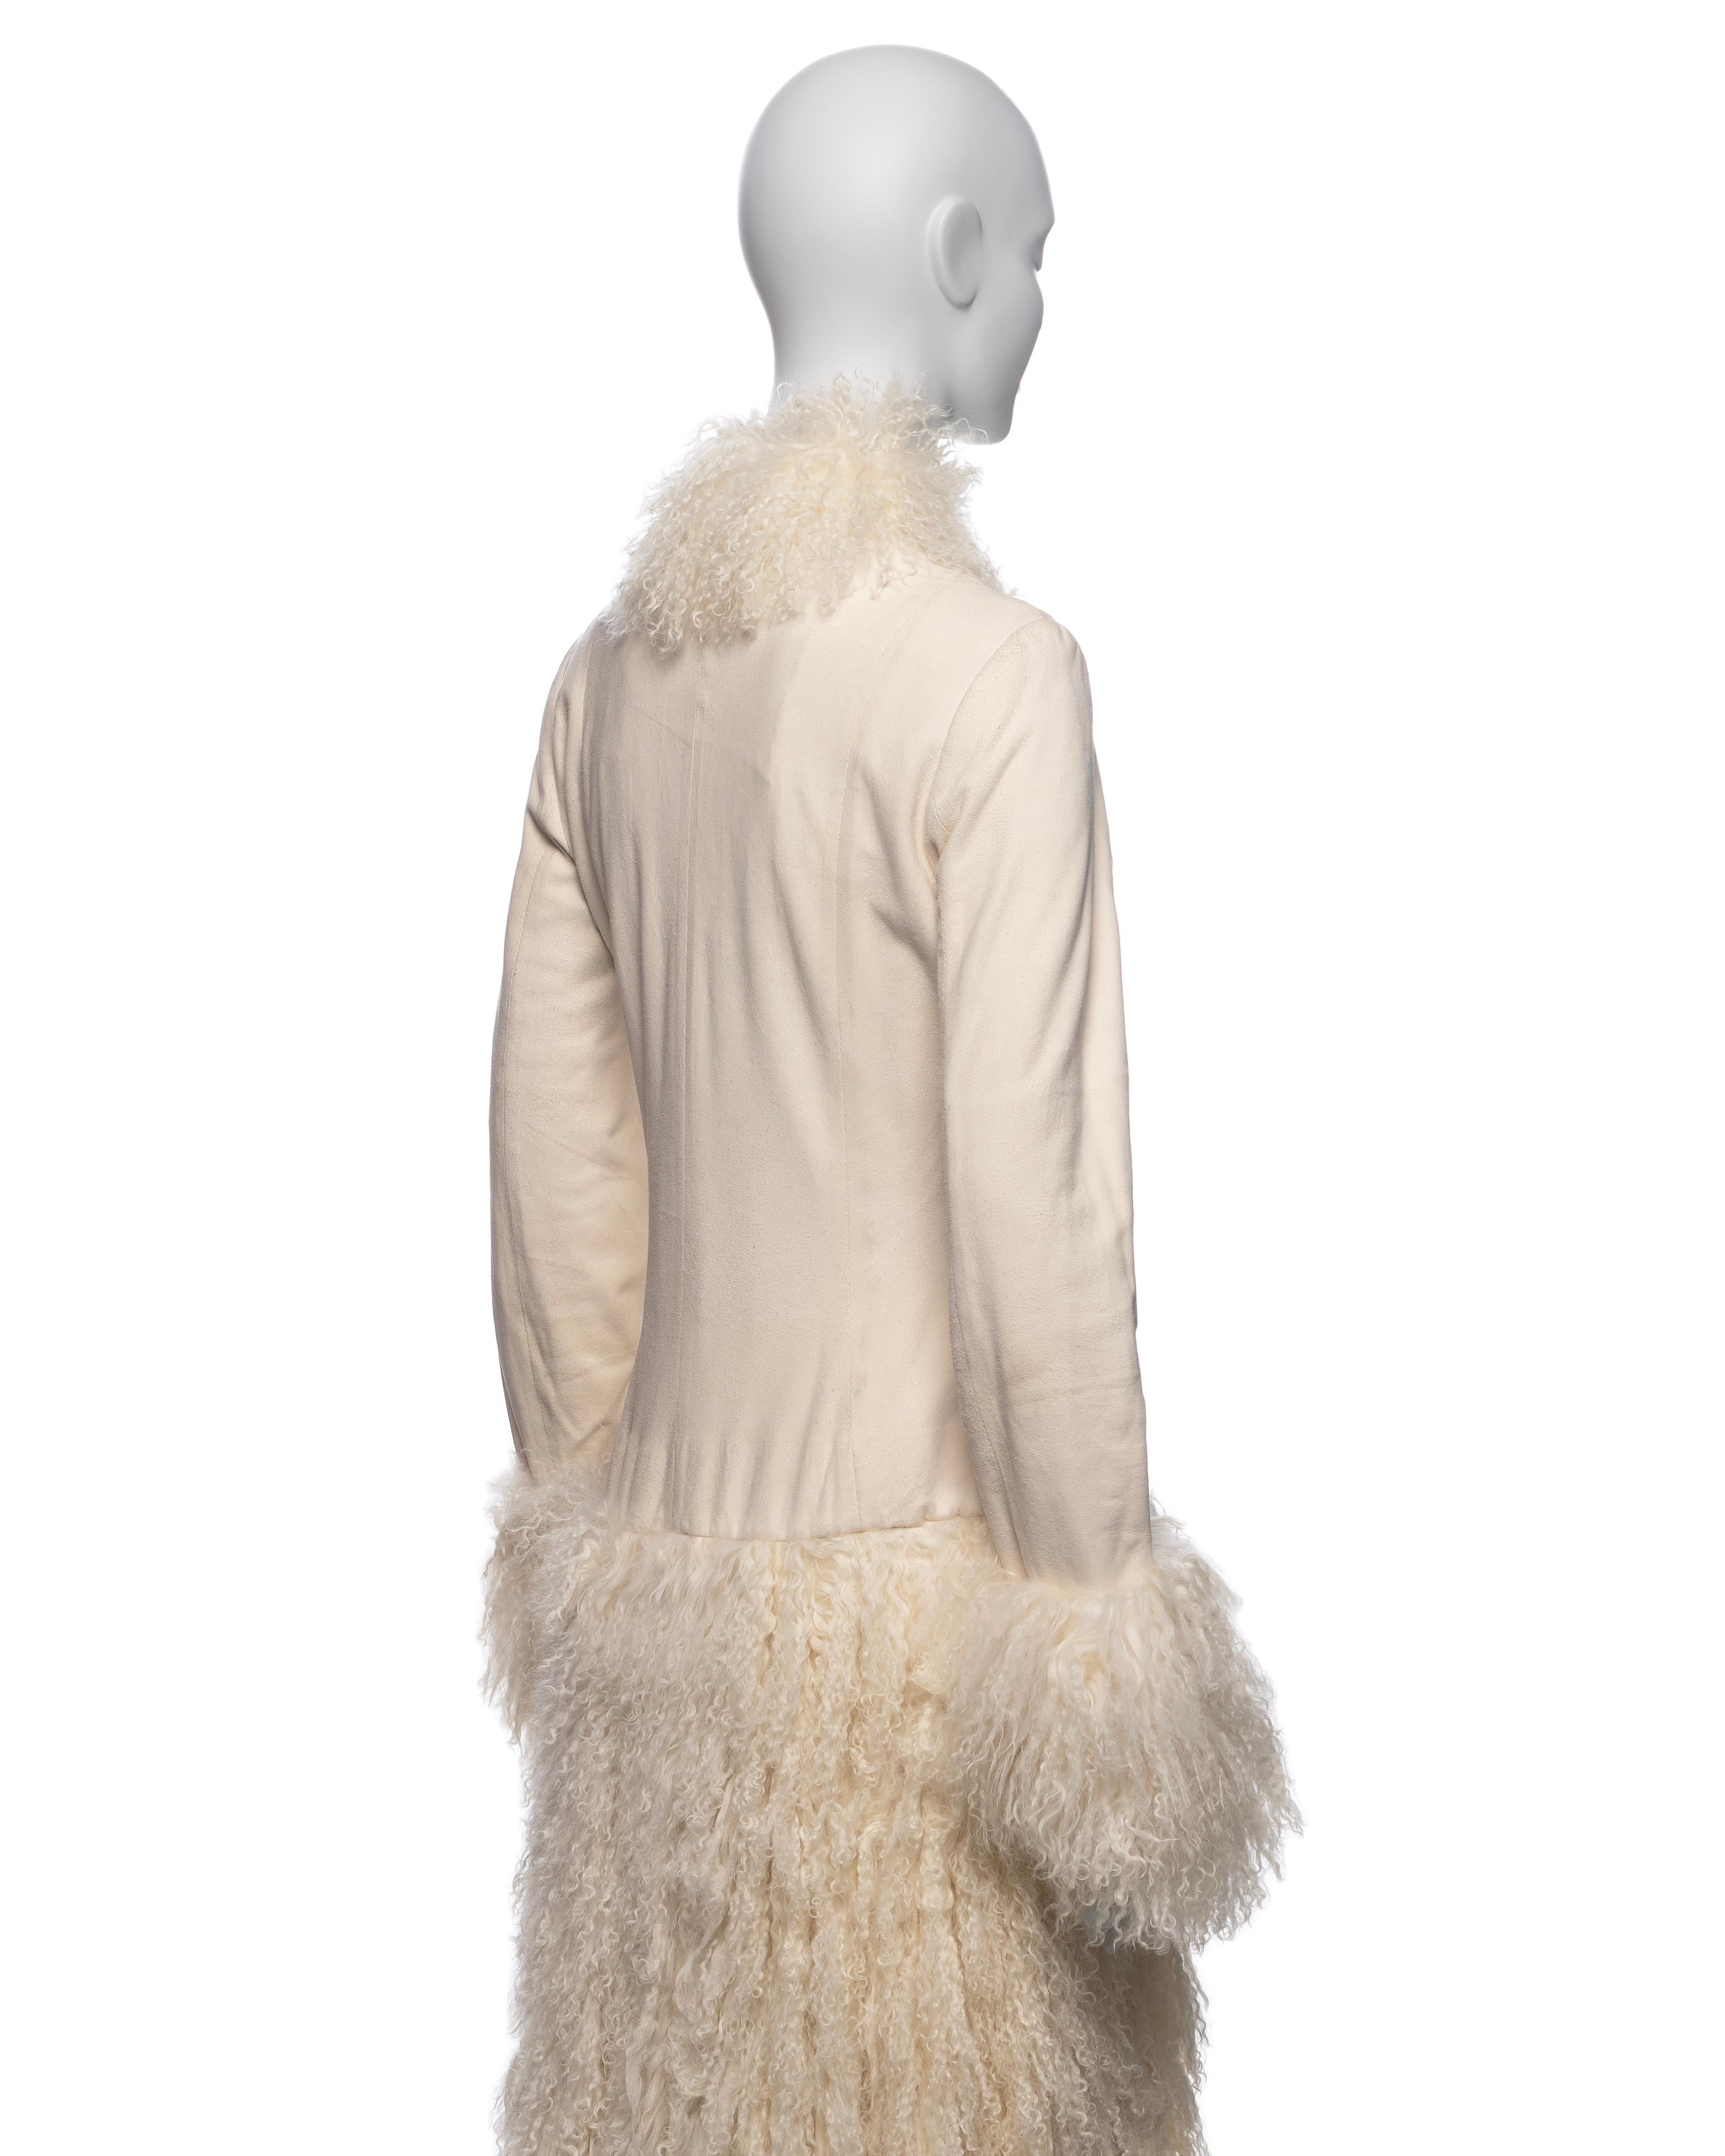 Jean Paul Gaultier White Mongolian Lamb Fur and Leather Coat Dress, FW 2006 For Sale 7